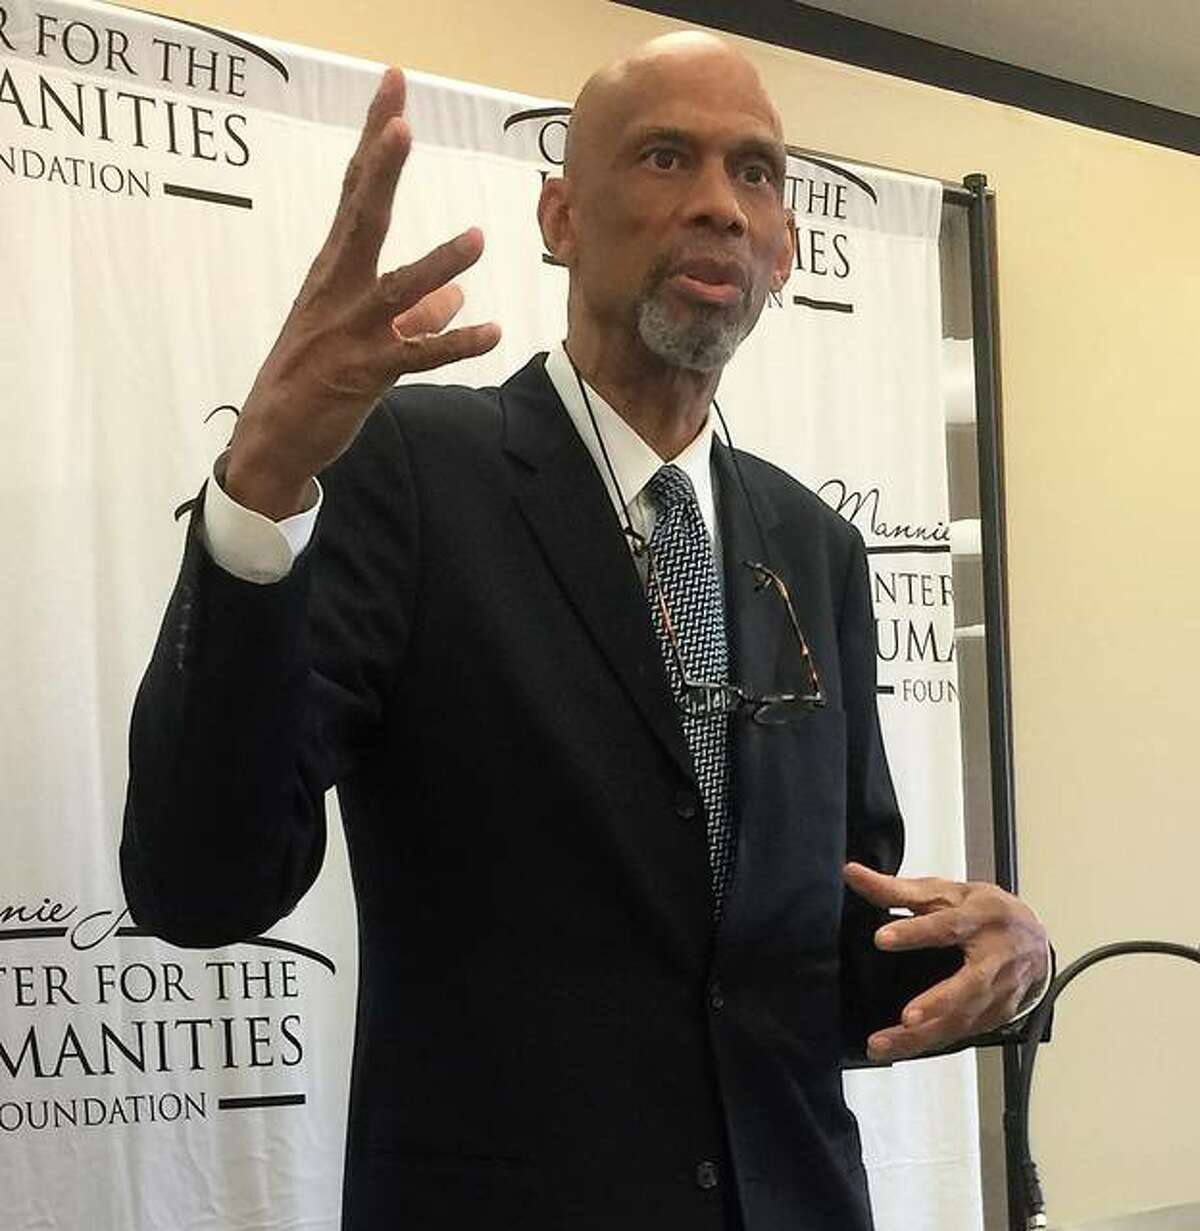 NBA legend turned author and activist Kareem Abdul-Jabbar was guest speaker for the Mannie Jackson Center for the Humanities second annual fundraising event. The event was held Thursday at Southern Illinois University Edwardsville.